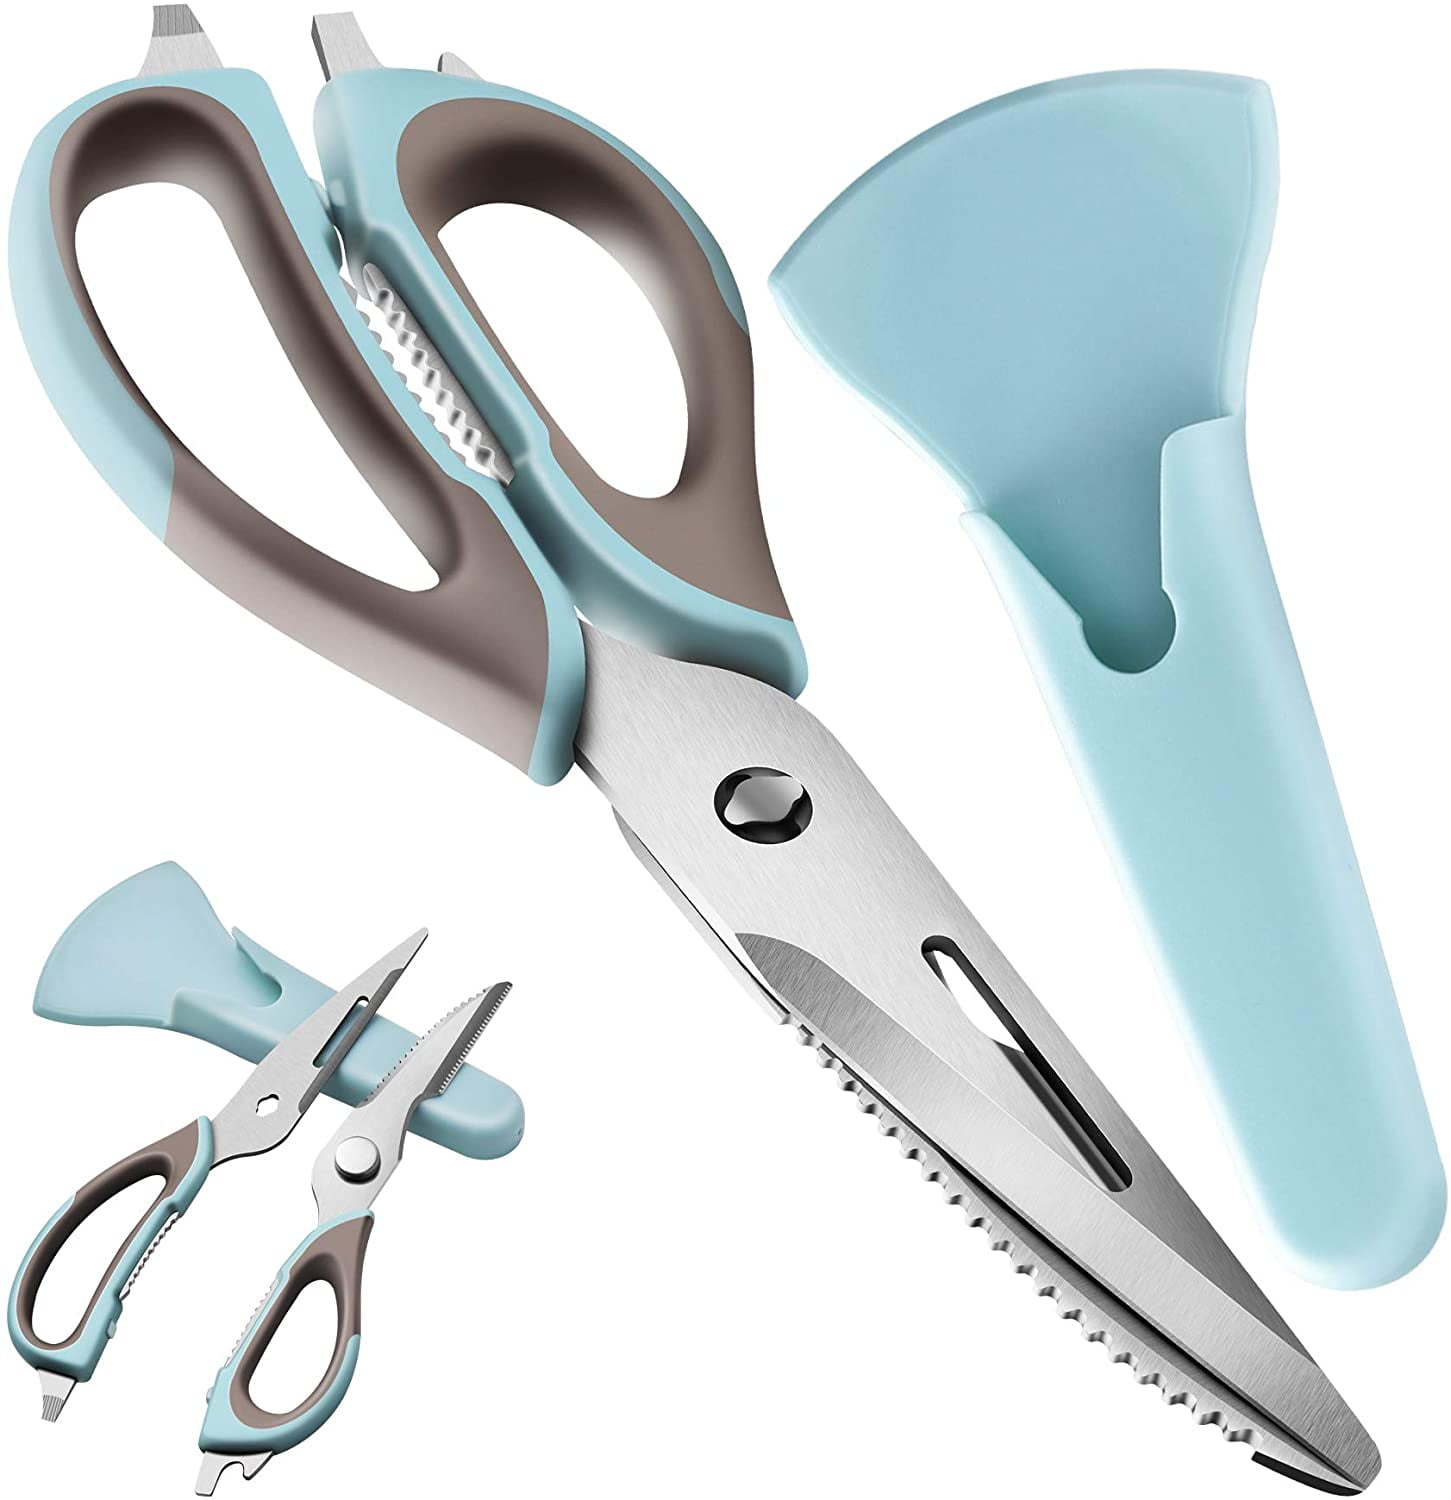 MARNA Cooking Scissors (Stainless / Dishwasher Safe) K747BK for Cooking